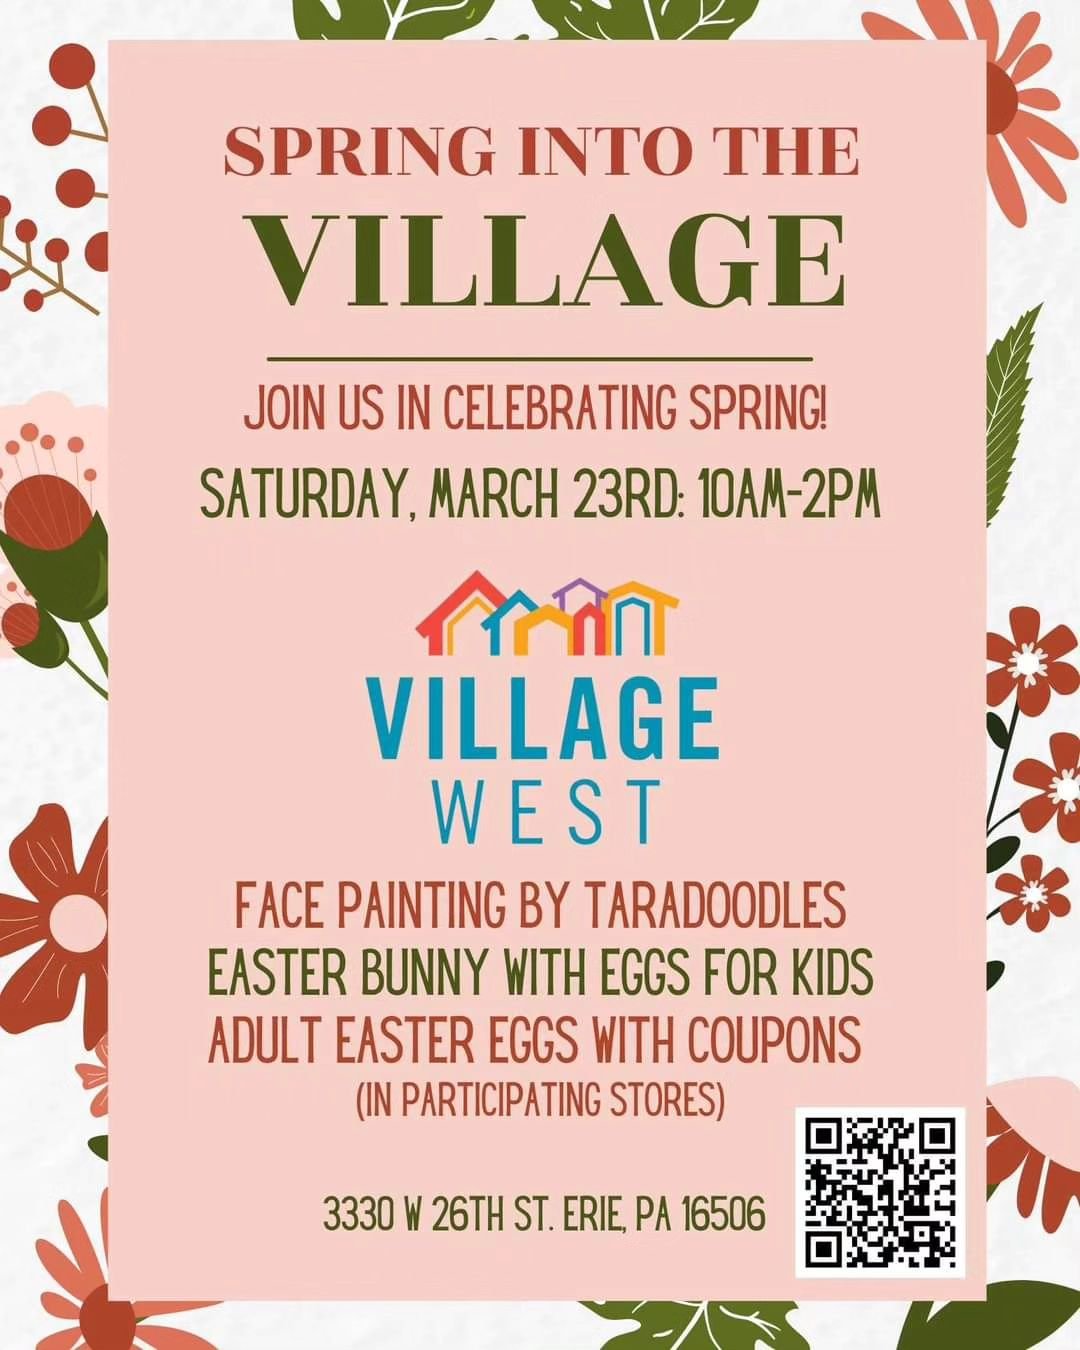 This Saturday!!! Come visit the Village West Plaza and visit with the Easter Bunny. He will have special treats for all the kids. Adults can grab up some great deals when you get eggs from participating stores. See you there!!